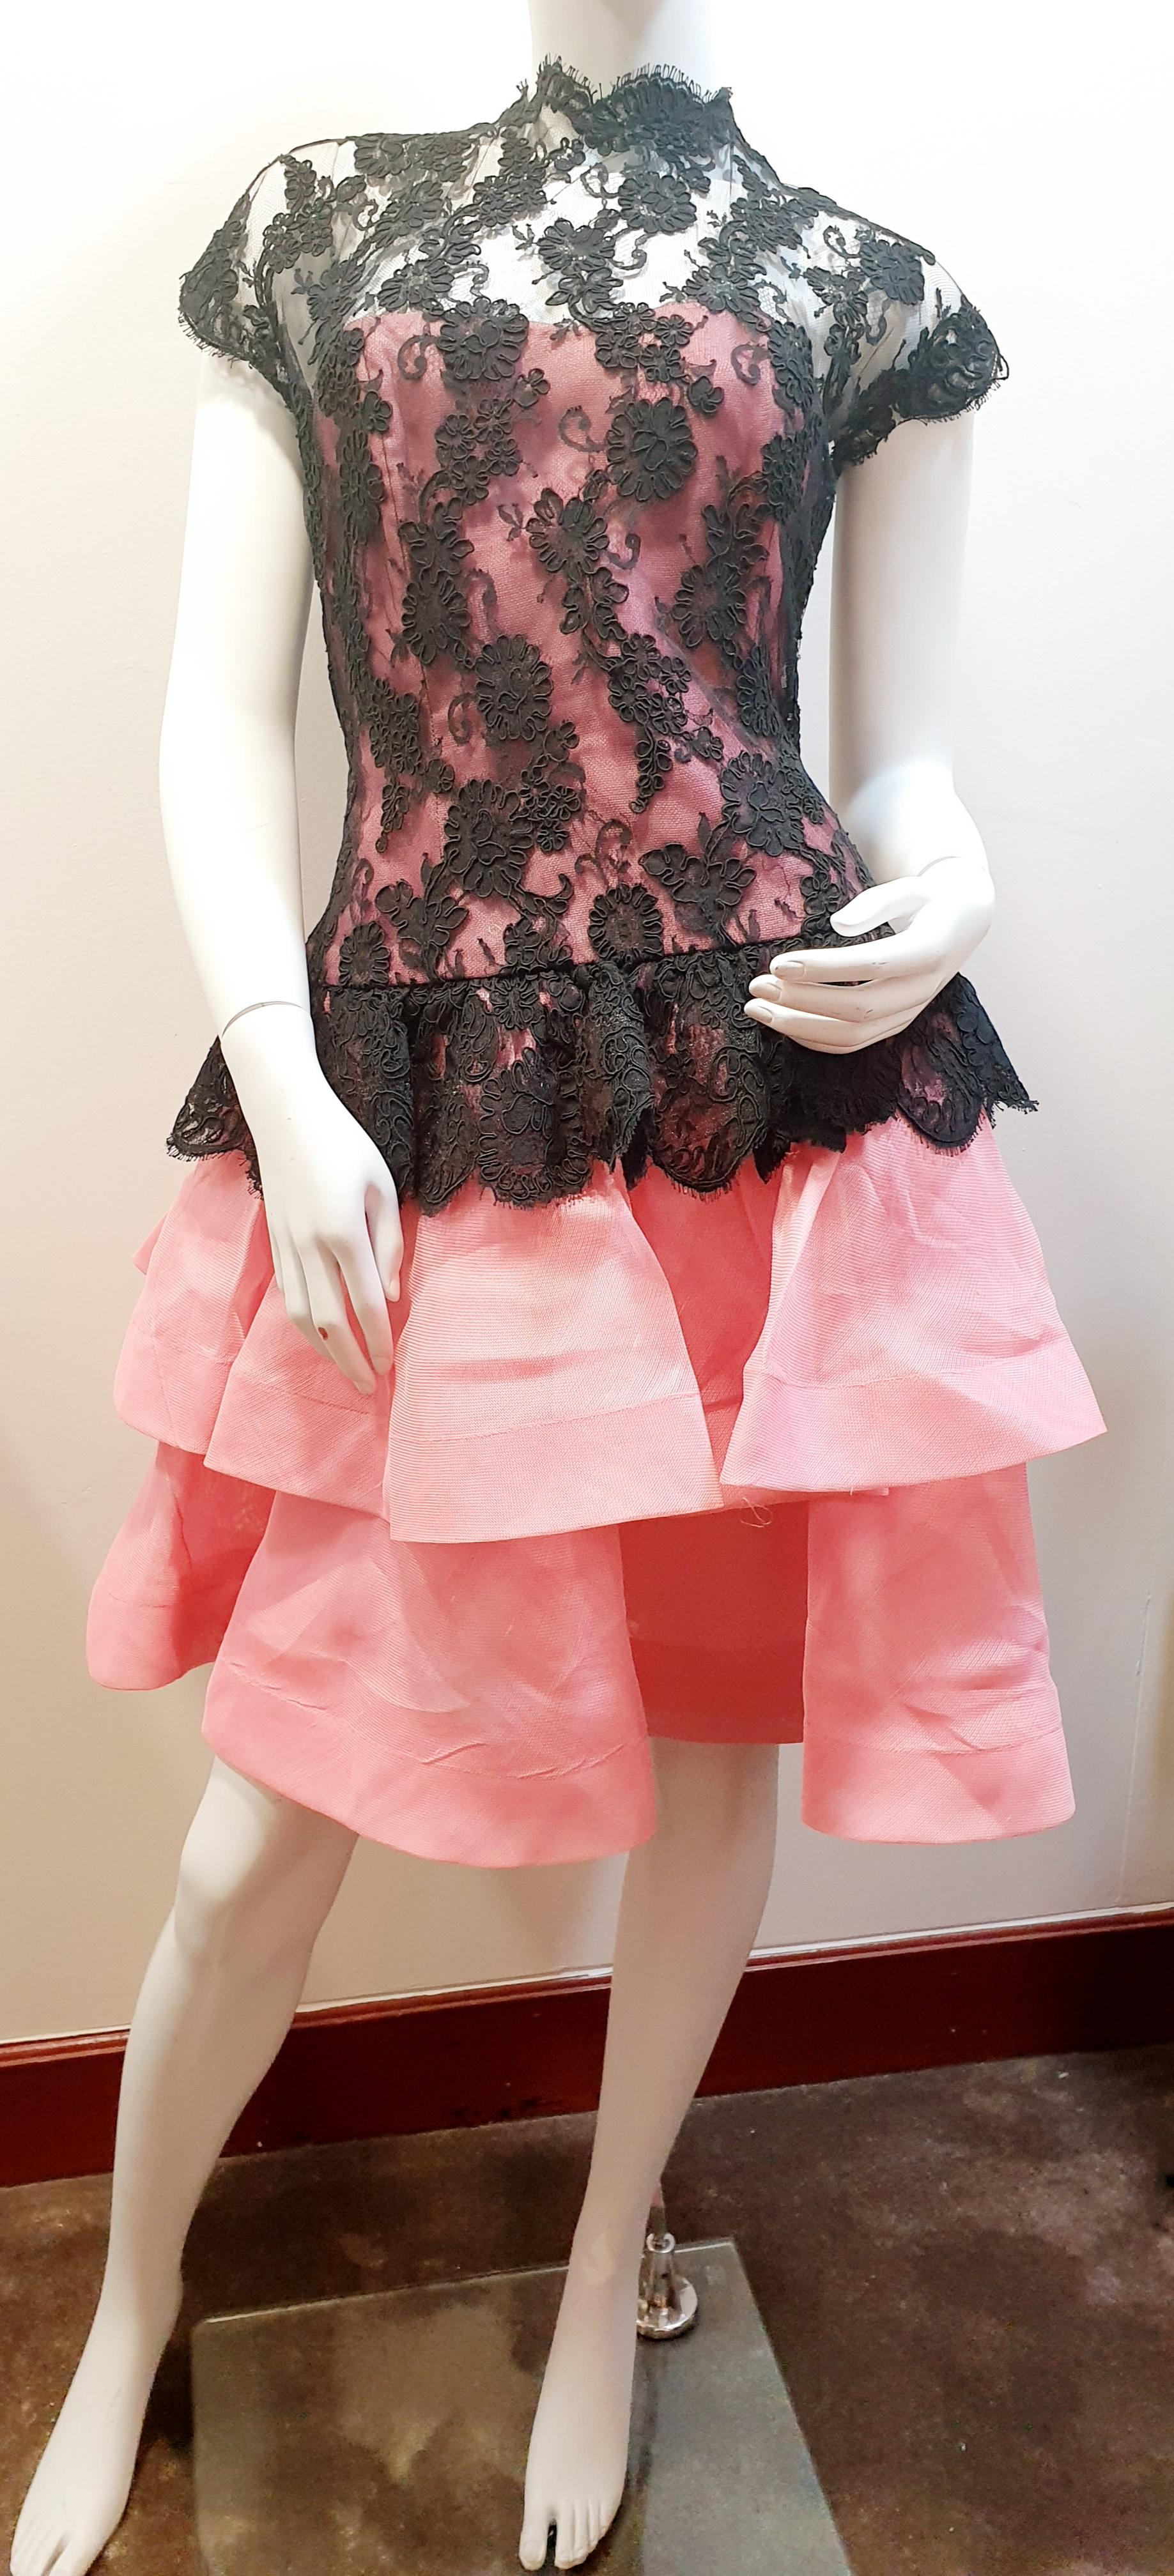 OSCAR DE LA RENTA  Point D'Esprit Pink Tulle and Black Lace Dress 
Oscar de la Renta is an American fashion brand , the flagship of American -made fashion .
Size  10 USA
READY TO SHIP
*Shipment of this piece is not affected by COVID-19. Orders